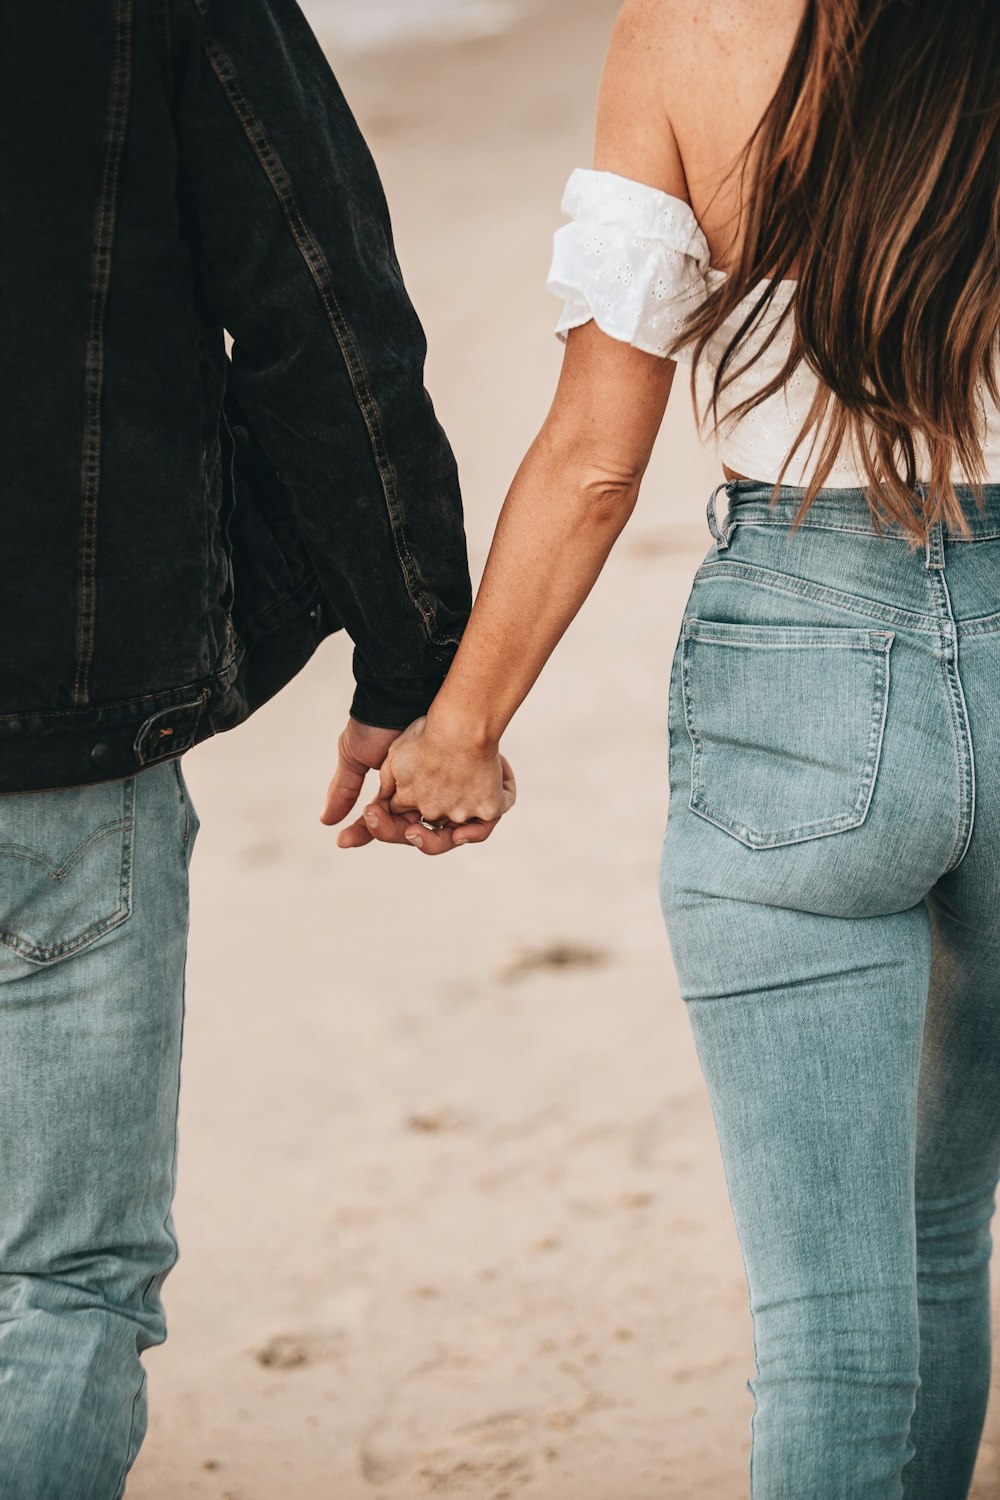 woman in white shirt and blue denim jeans holding hands with man in blue denim jeans